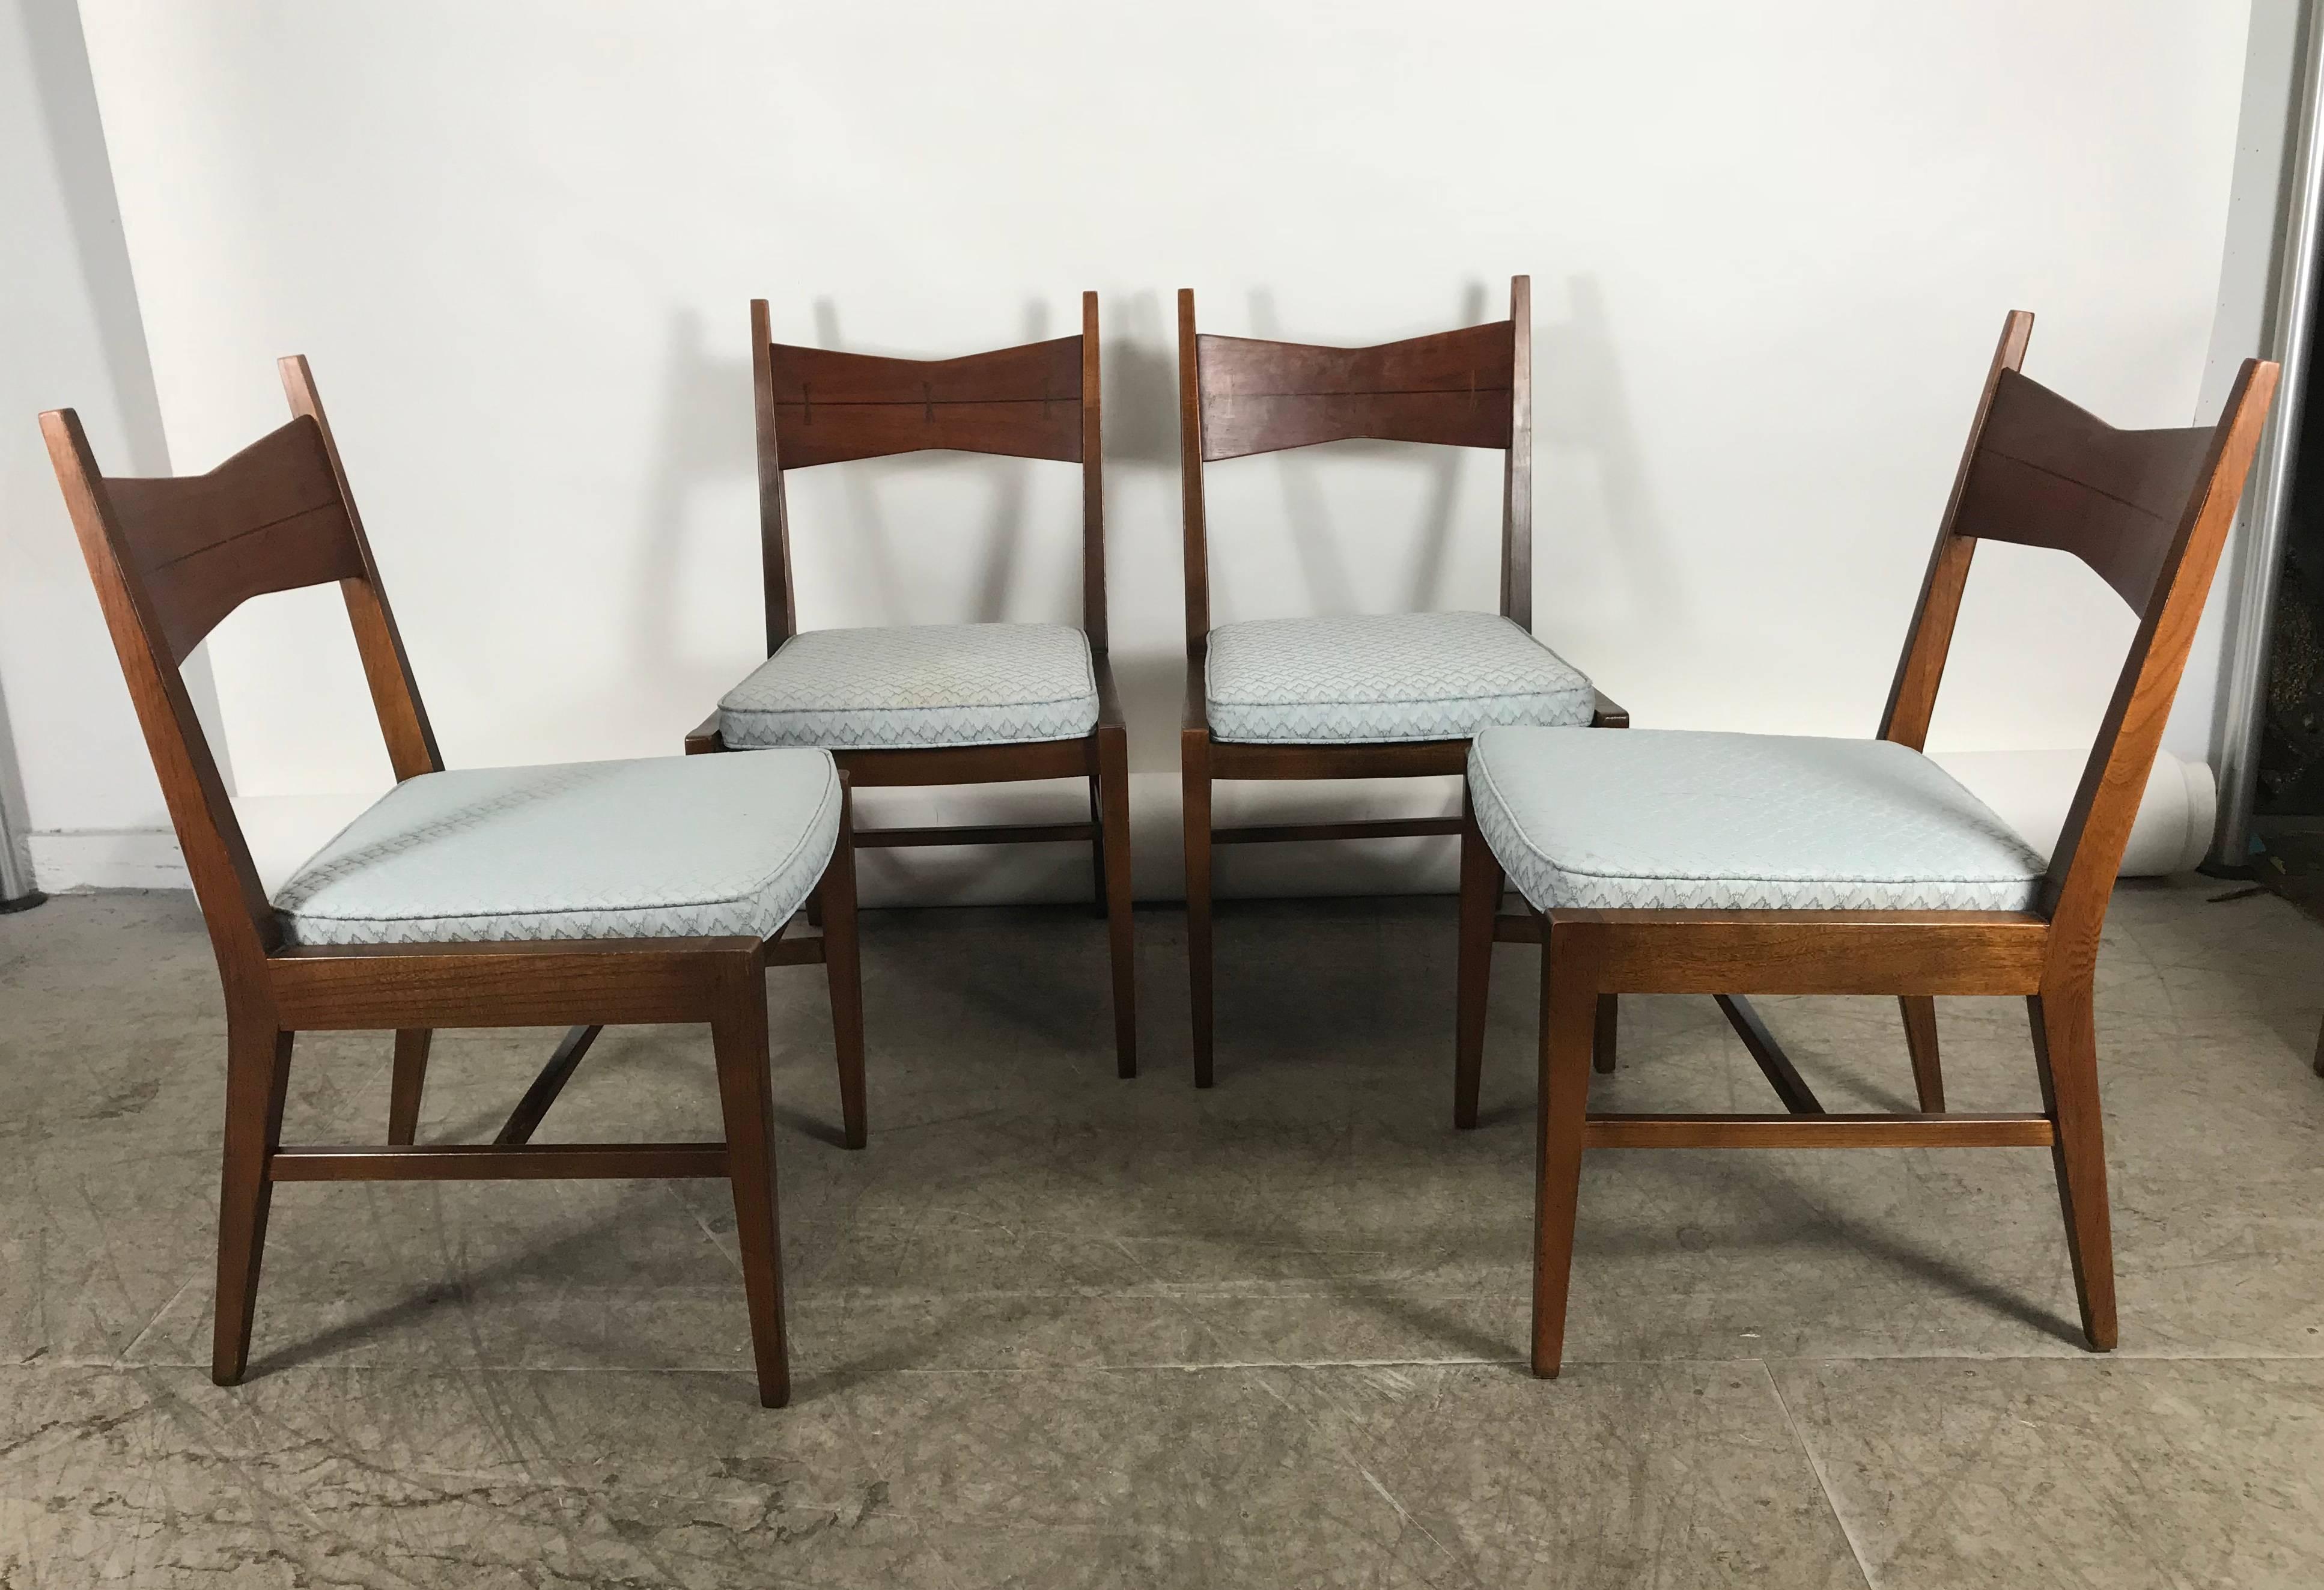 American Set of Six Mid-Century Modern Dining Chairs, Lane Tuxedo, Butterfly Inlay